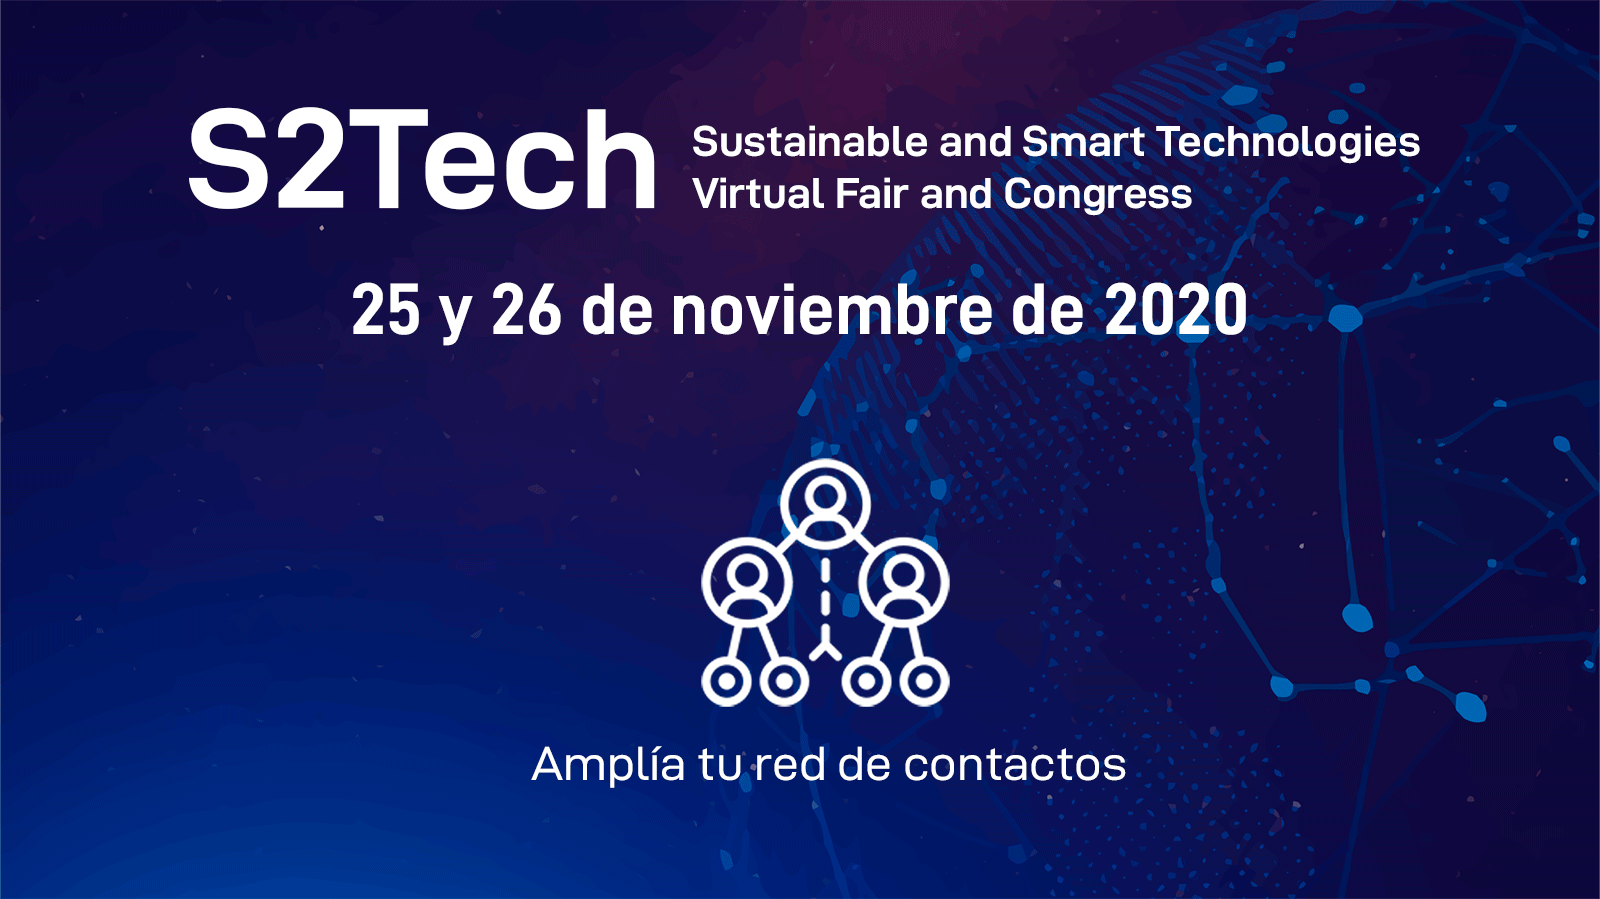 Sustainable and Smart Technologies Virtual Fair and Congress